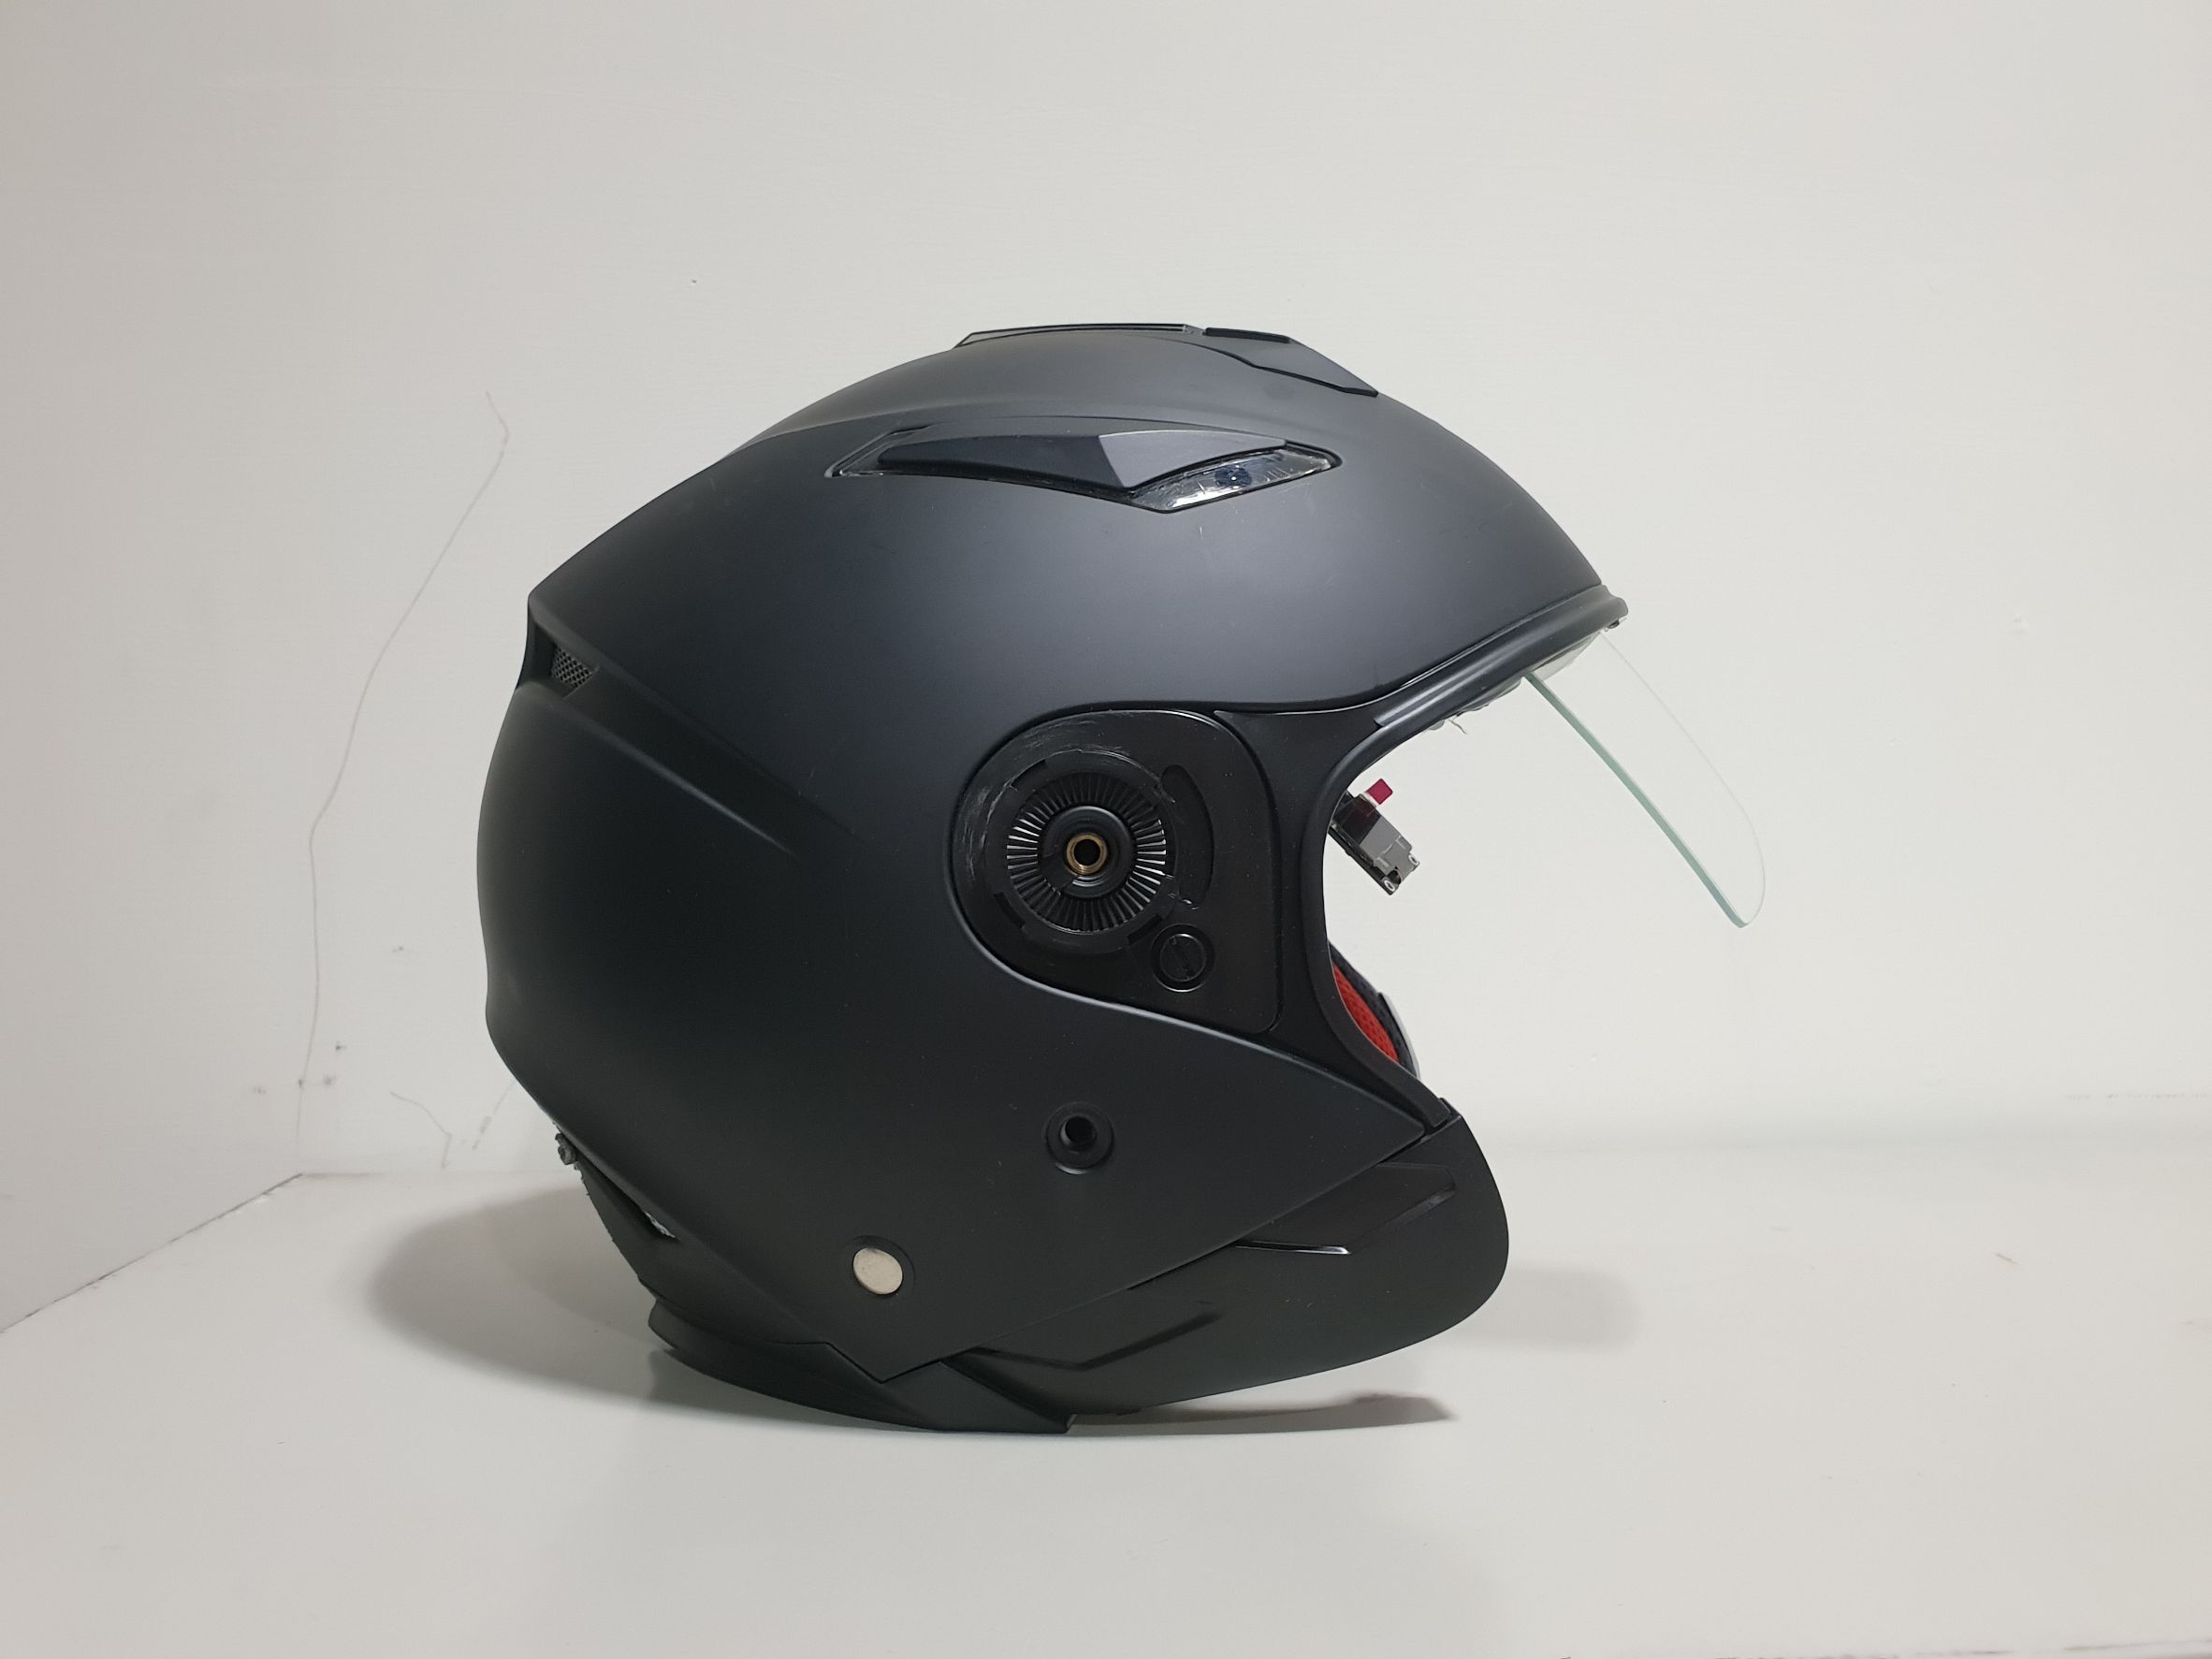 Helmet with HUD Supporting Display